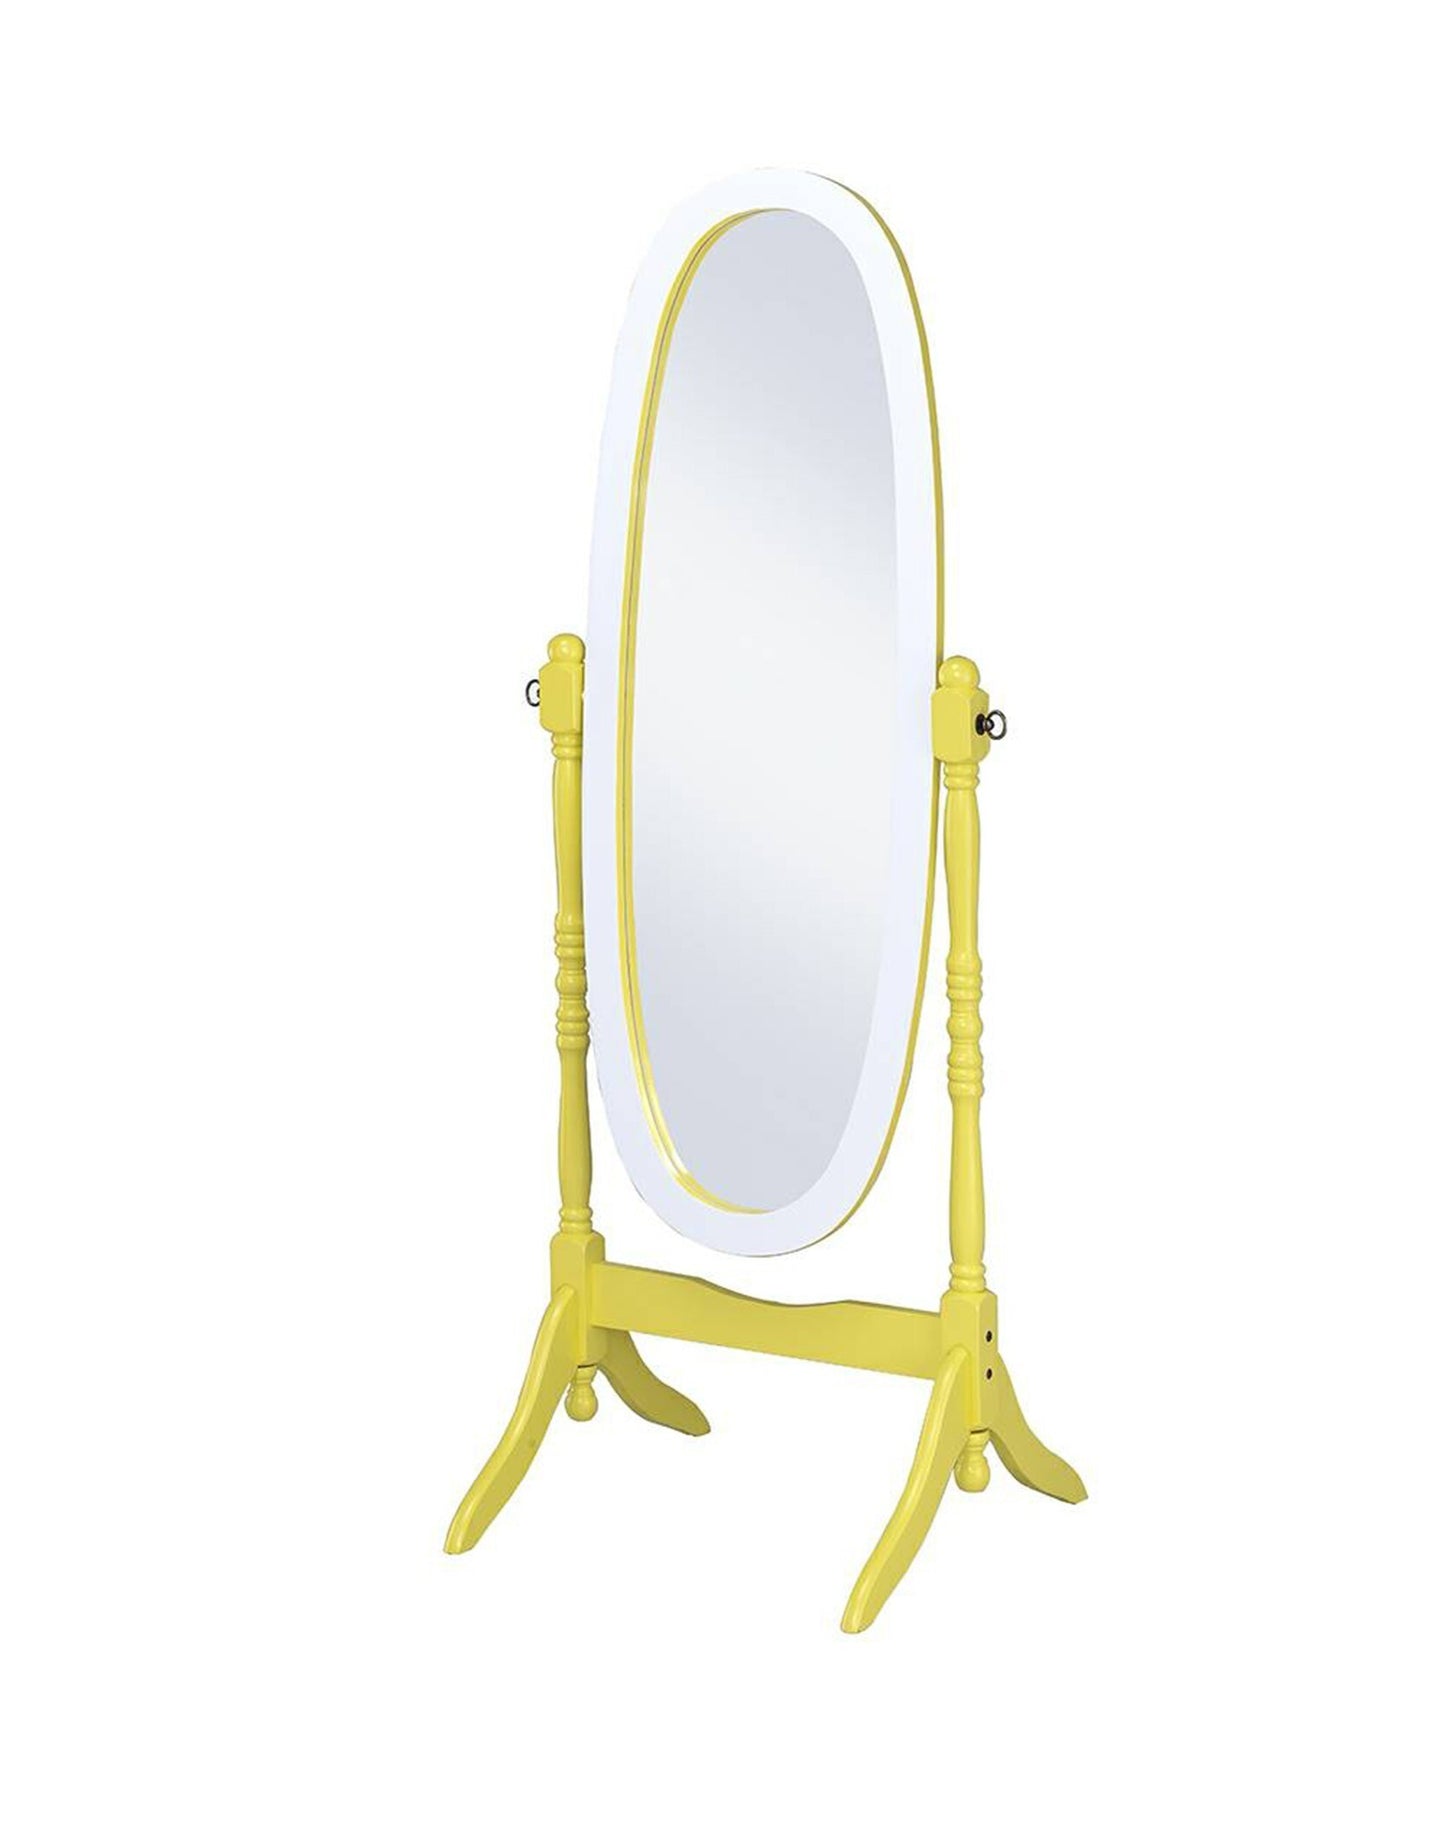 59" Painted Oval Cheval Standing Mirror Freestanding With Solid Wood Frame